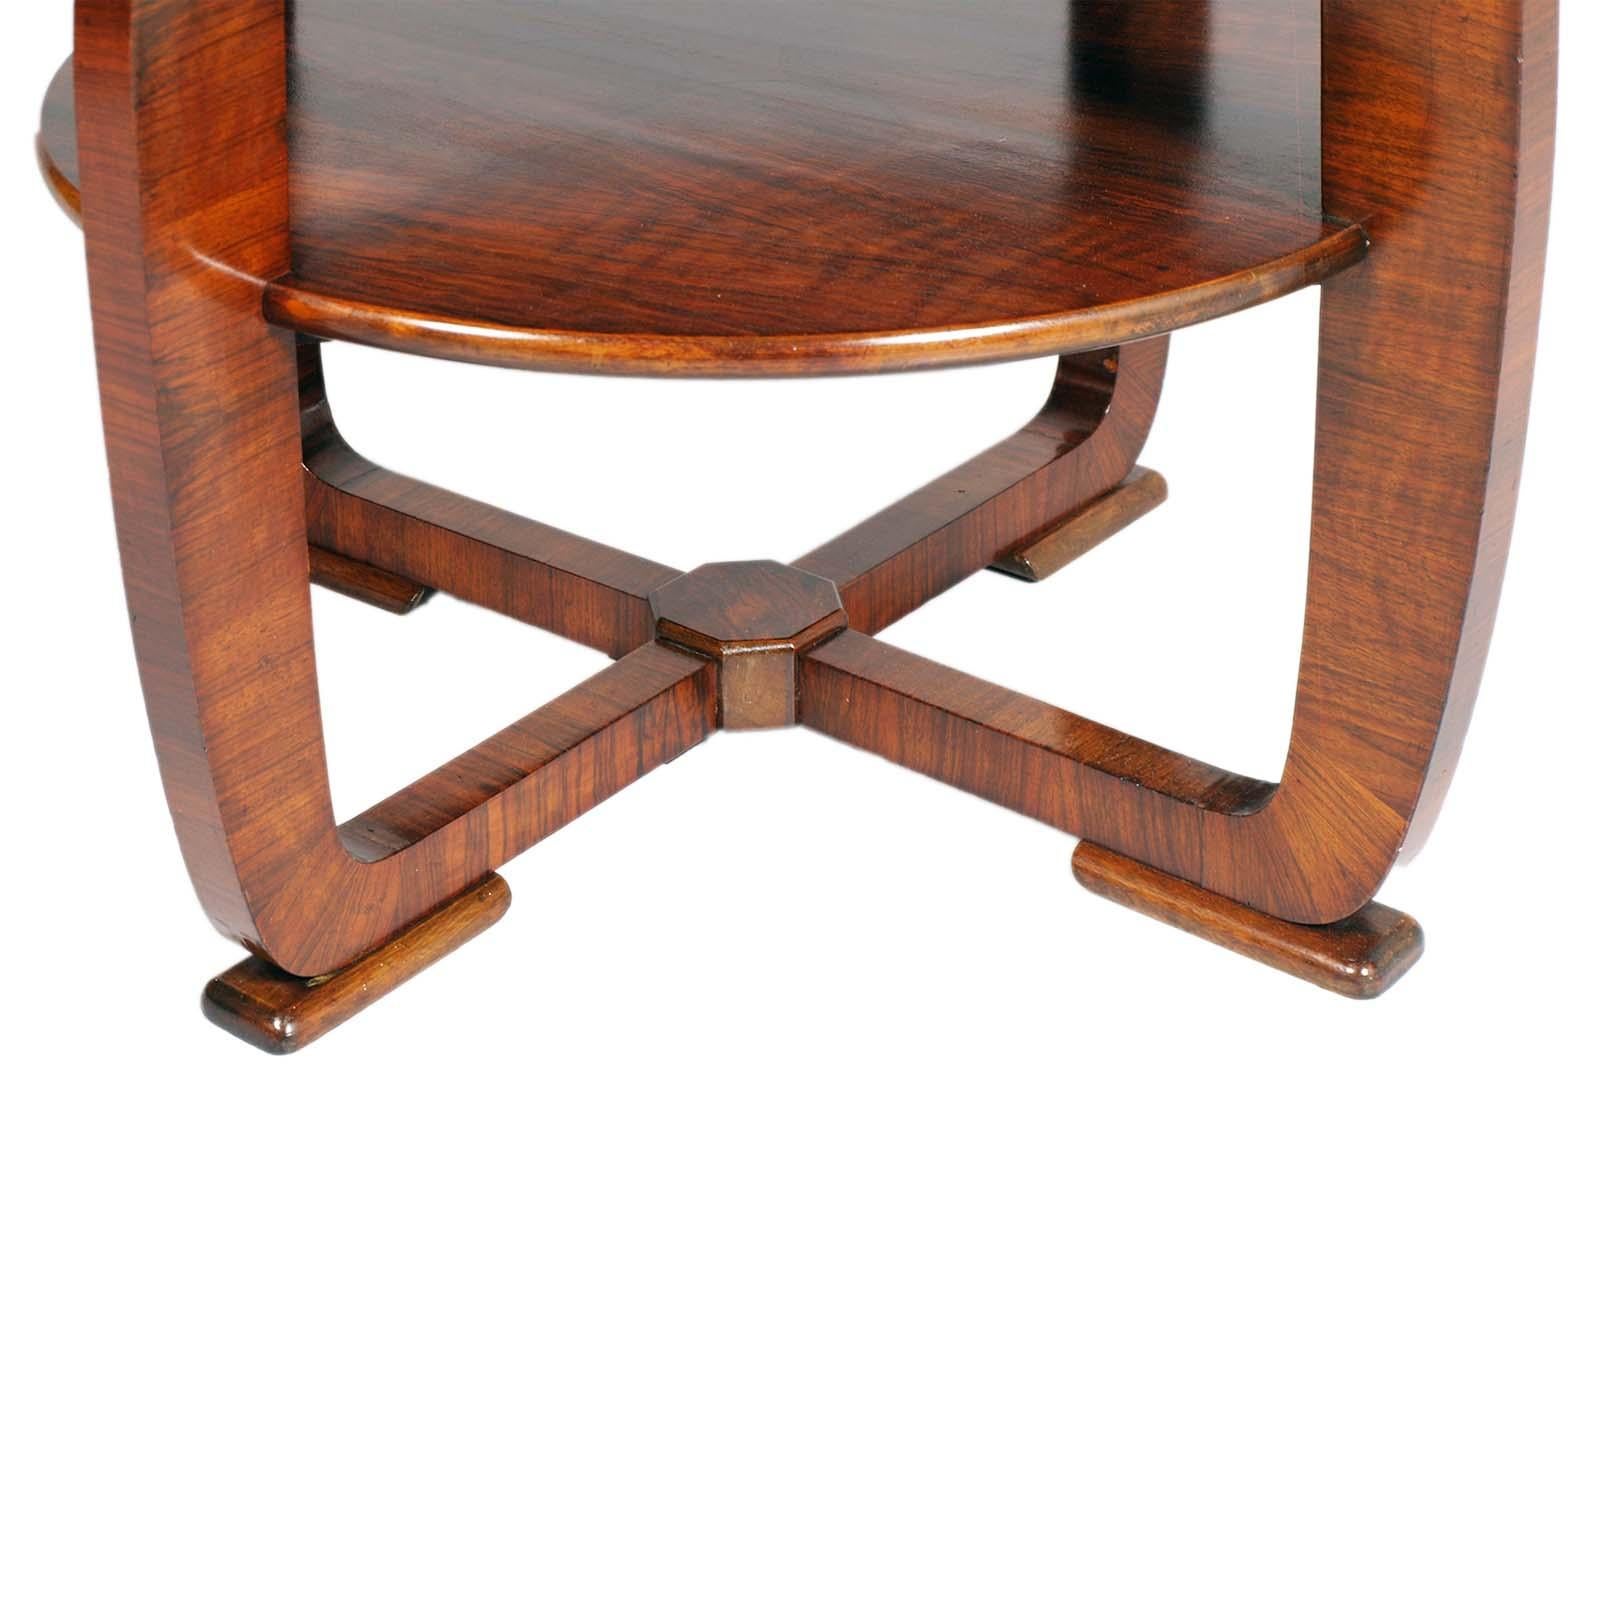 Art Deco two tier central coffee table by Gio Ponti & Emilo Lancia designers for Meroni & Fossati manufacturer in figured massive walnut , circa 1930s.
The designs obtained from the walnut wood are created by the combination of solid wood, which